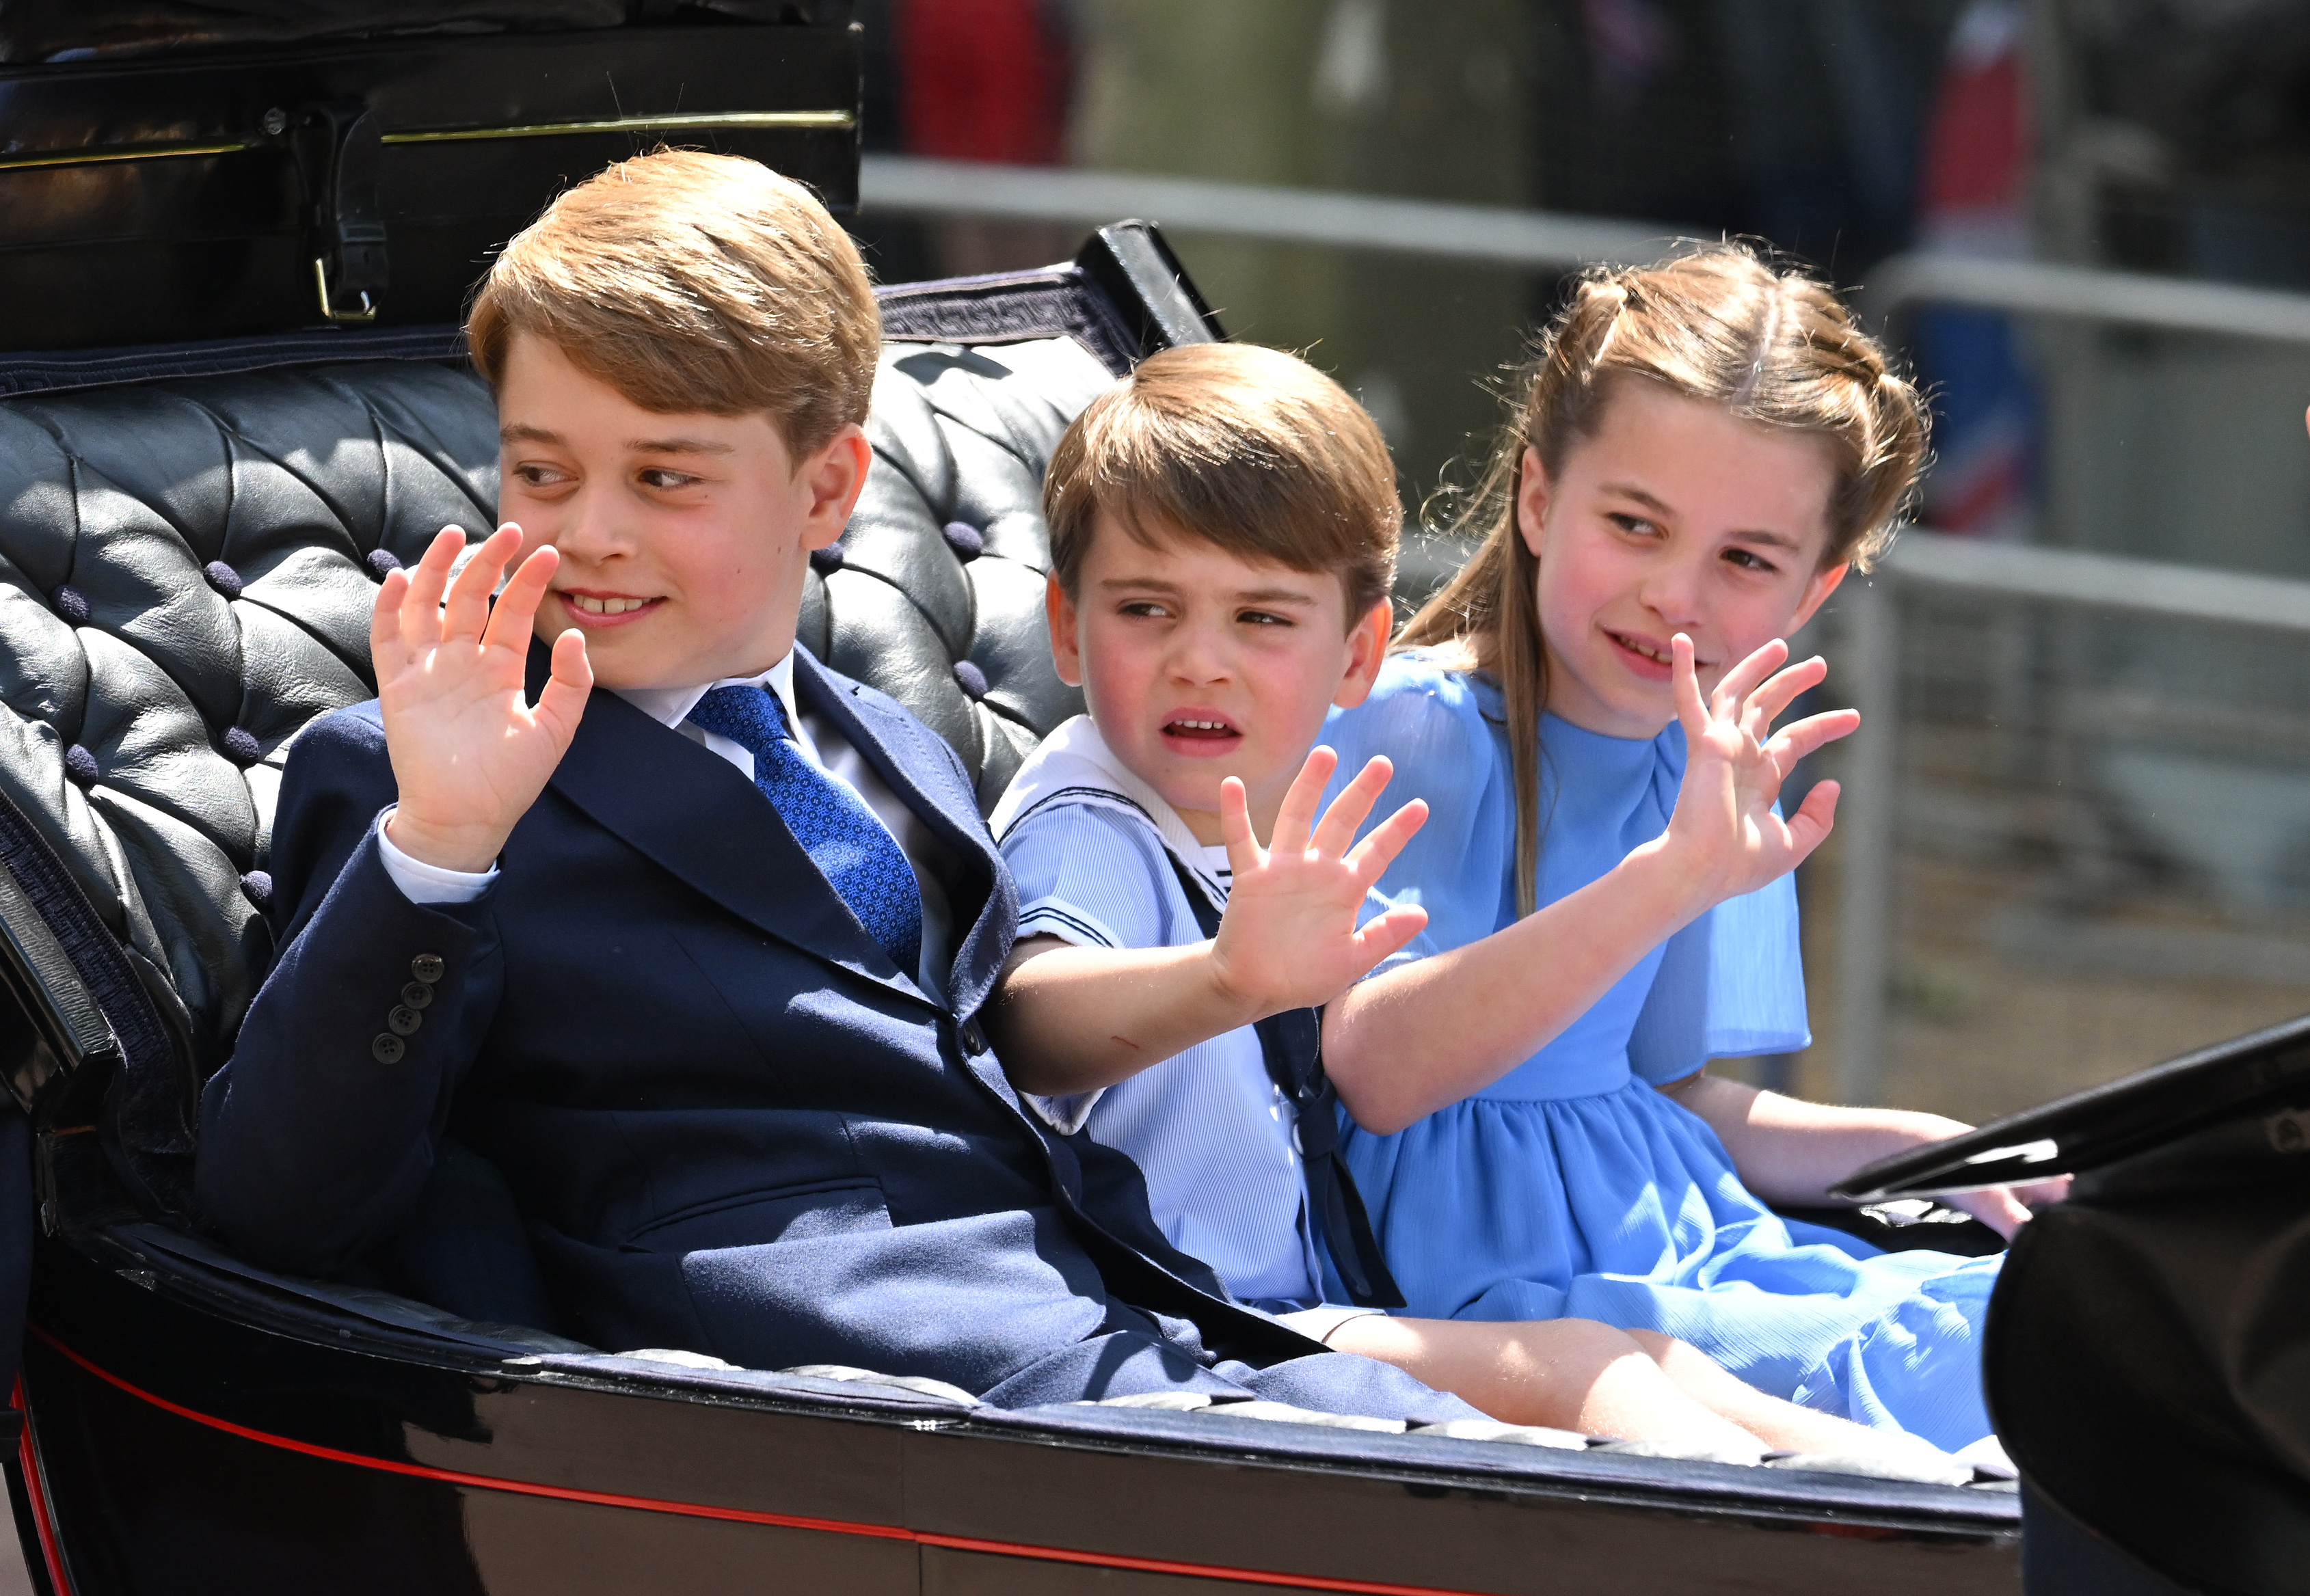 Prince George, Prince Louis, and Princess Charlotte during the Trooping the Colour during Queen Elizabeth II Platinum Jubilee on June 2, 2022 in London, England | Source: Getty Images